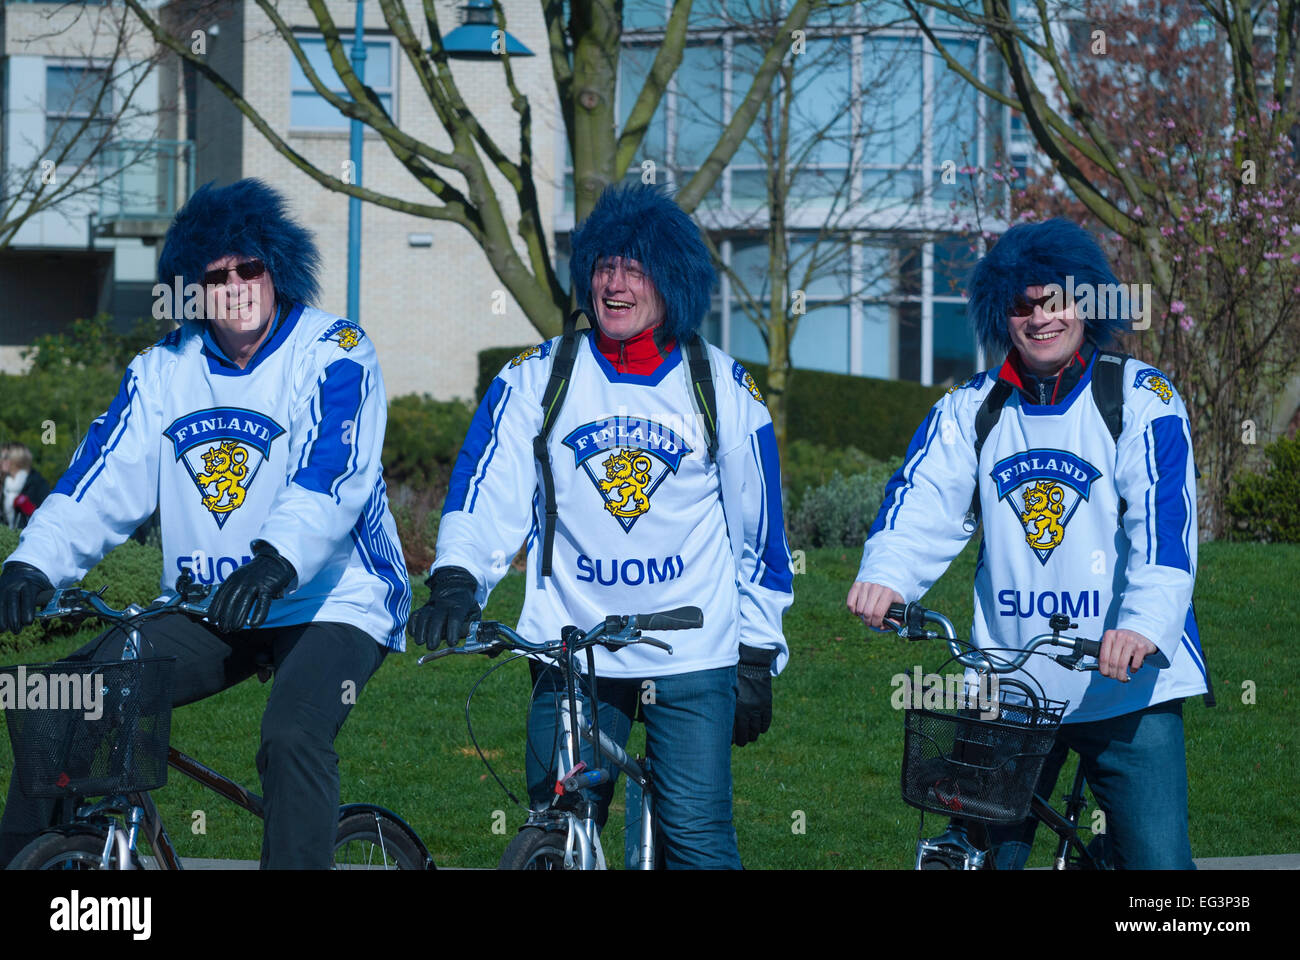 Vancouver, Canada-Feb,17,2010: Three of Team Finland fans riding bicycles during 2010 Winter Olympic Games. Stock Photo